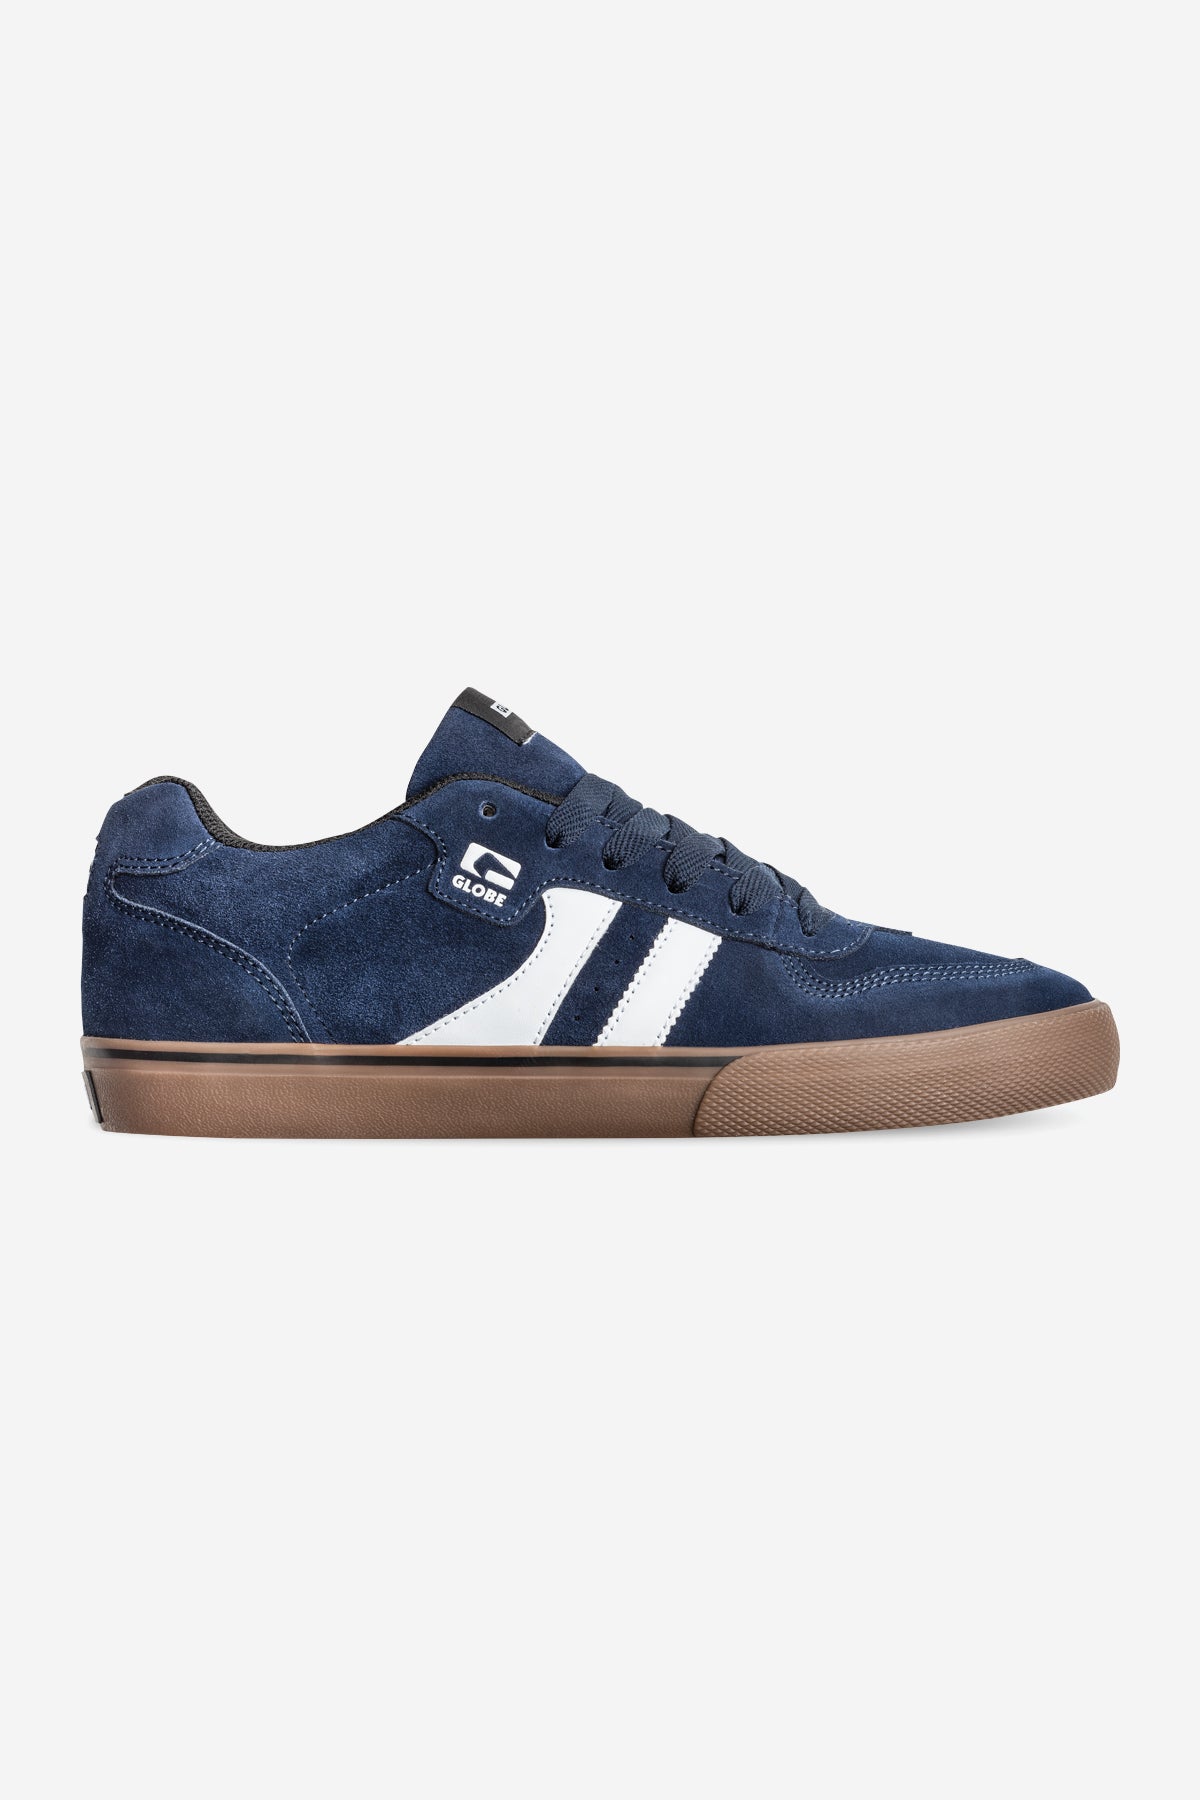 encore-2 navy gomme skateboard chaussures